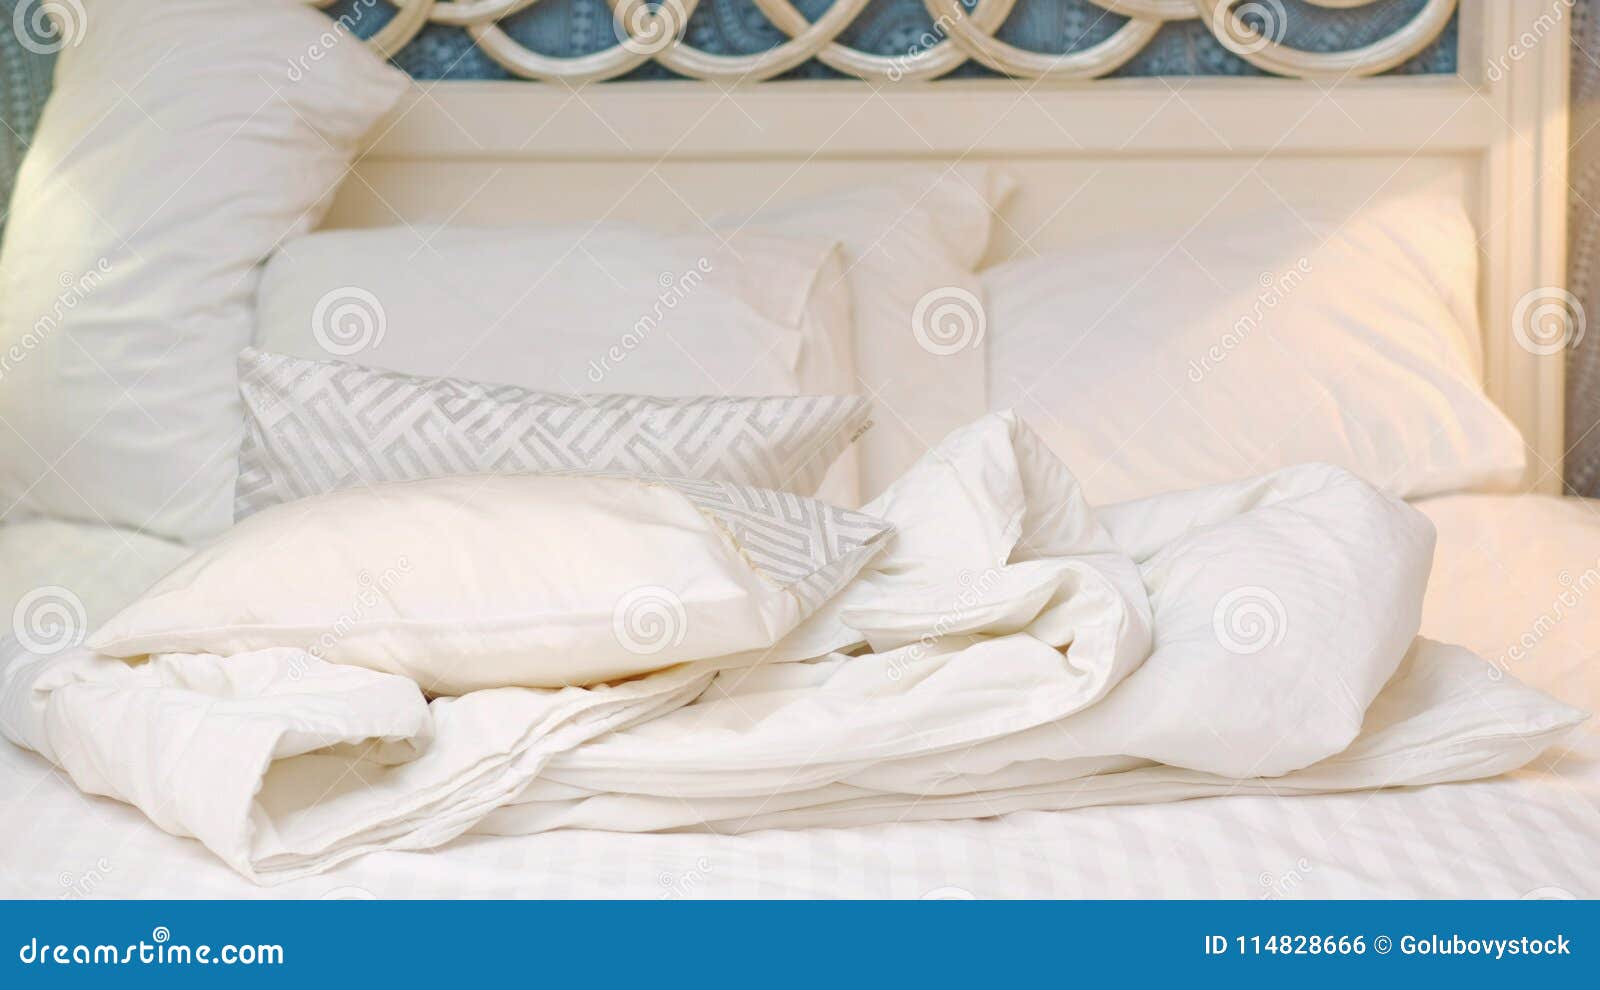 Bedroom Comfort Bedding Sheets Woman Making Bed Stock Photo